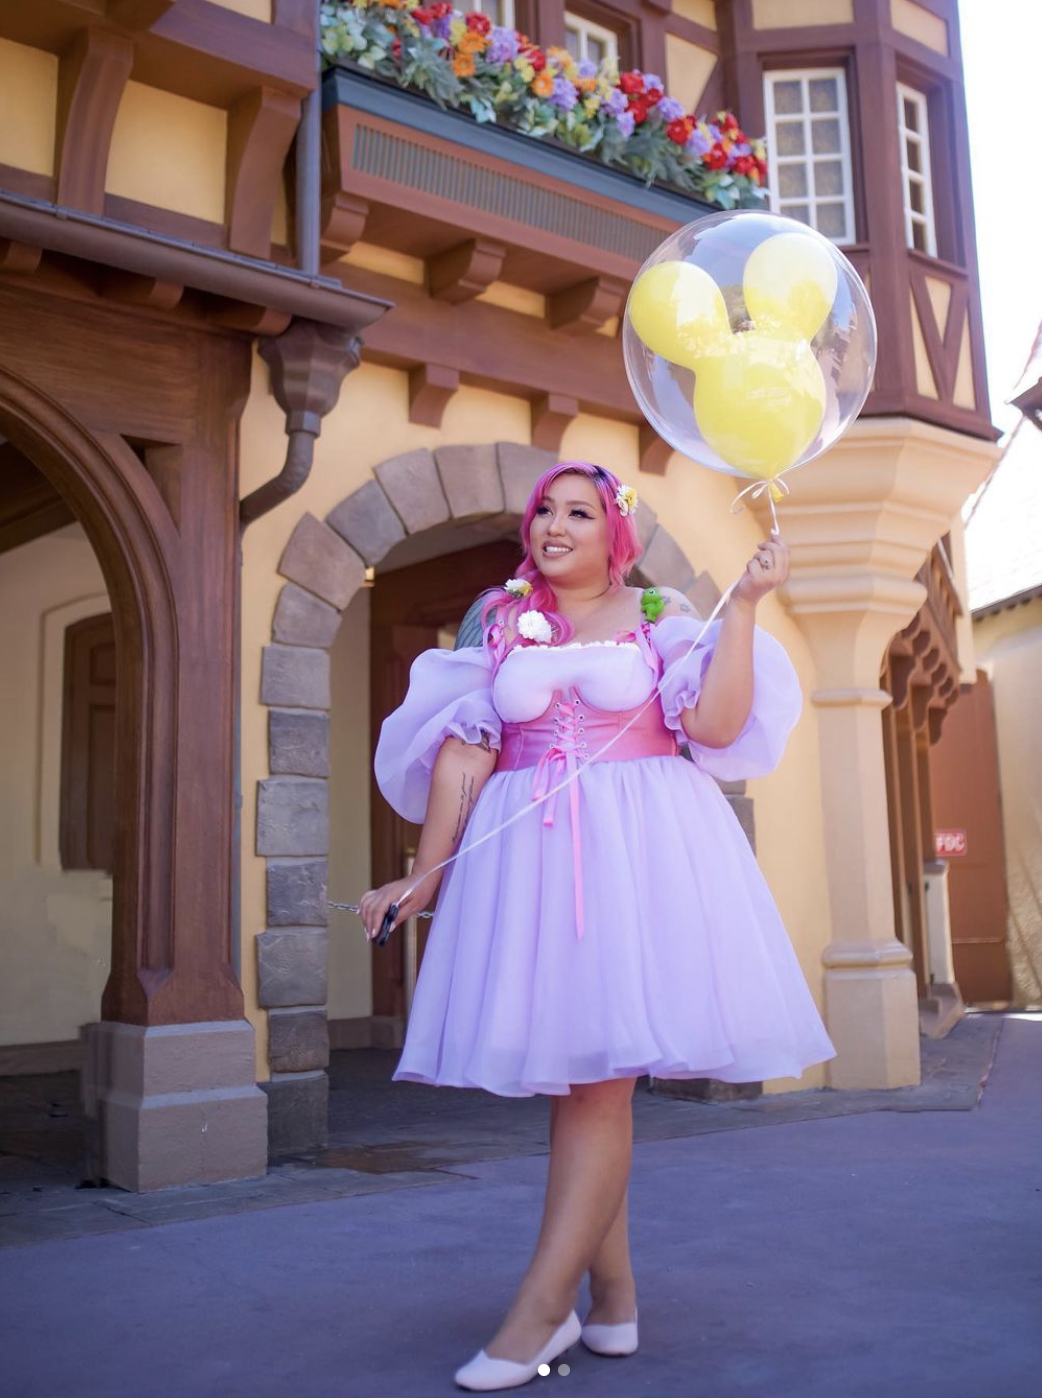 A light-skinned woman with long pink hair poses in a snort, puffy Rapunzel dress. She is holding a yellow Mickey Ears balloon and smiling off into the distance.